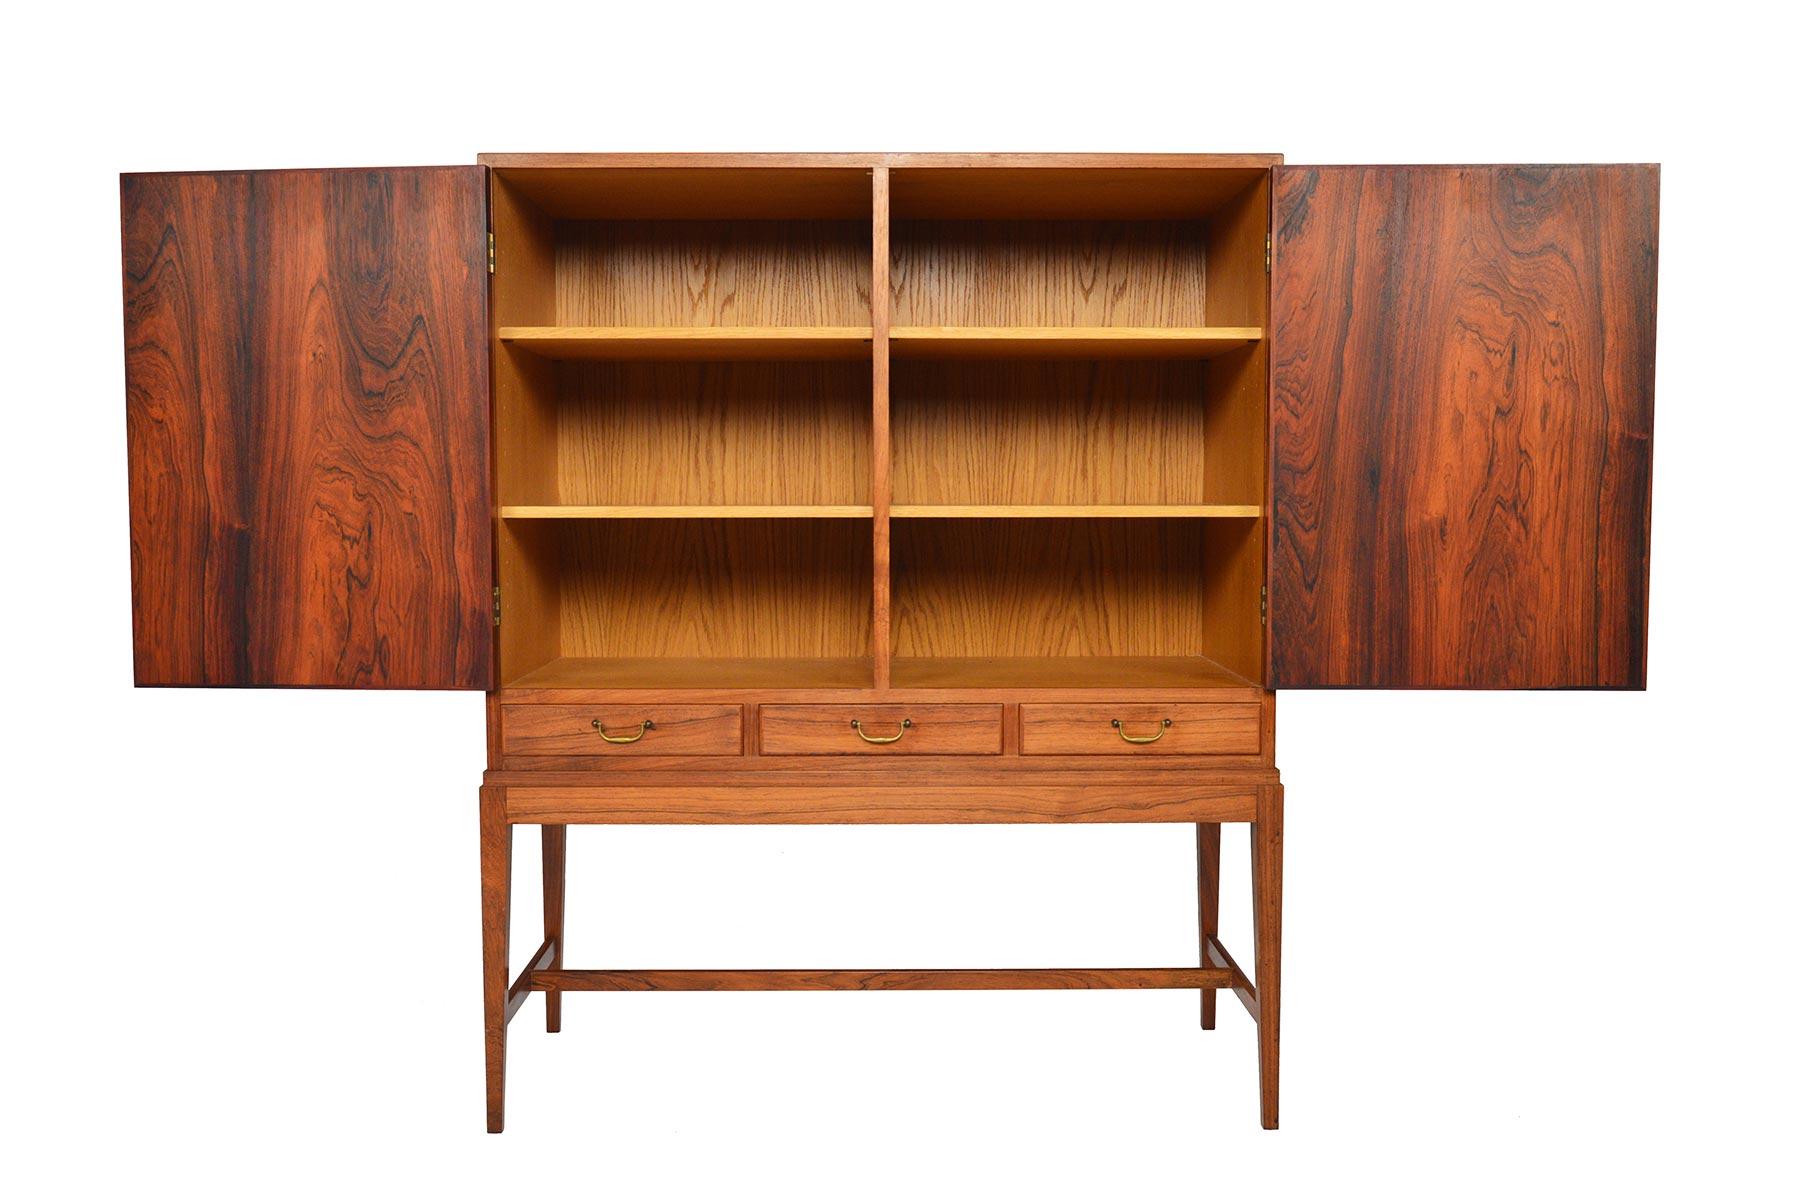 This Danish modern Brazilian rosewood cupboard by Ole Wanscher is an incredibly versatile storage piece- perfect for use as a dry bar! Stunning patinated rosewood offers a light, grain- rich finish only decades of careful stewardship can provide.